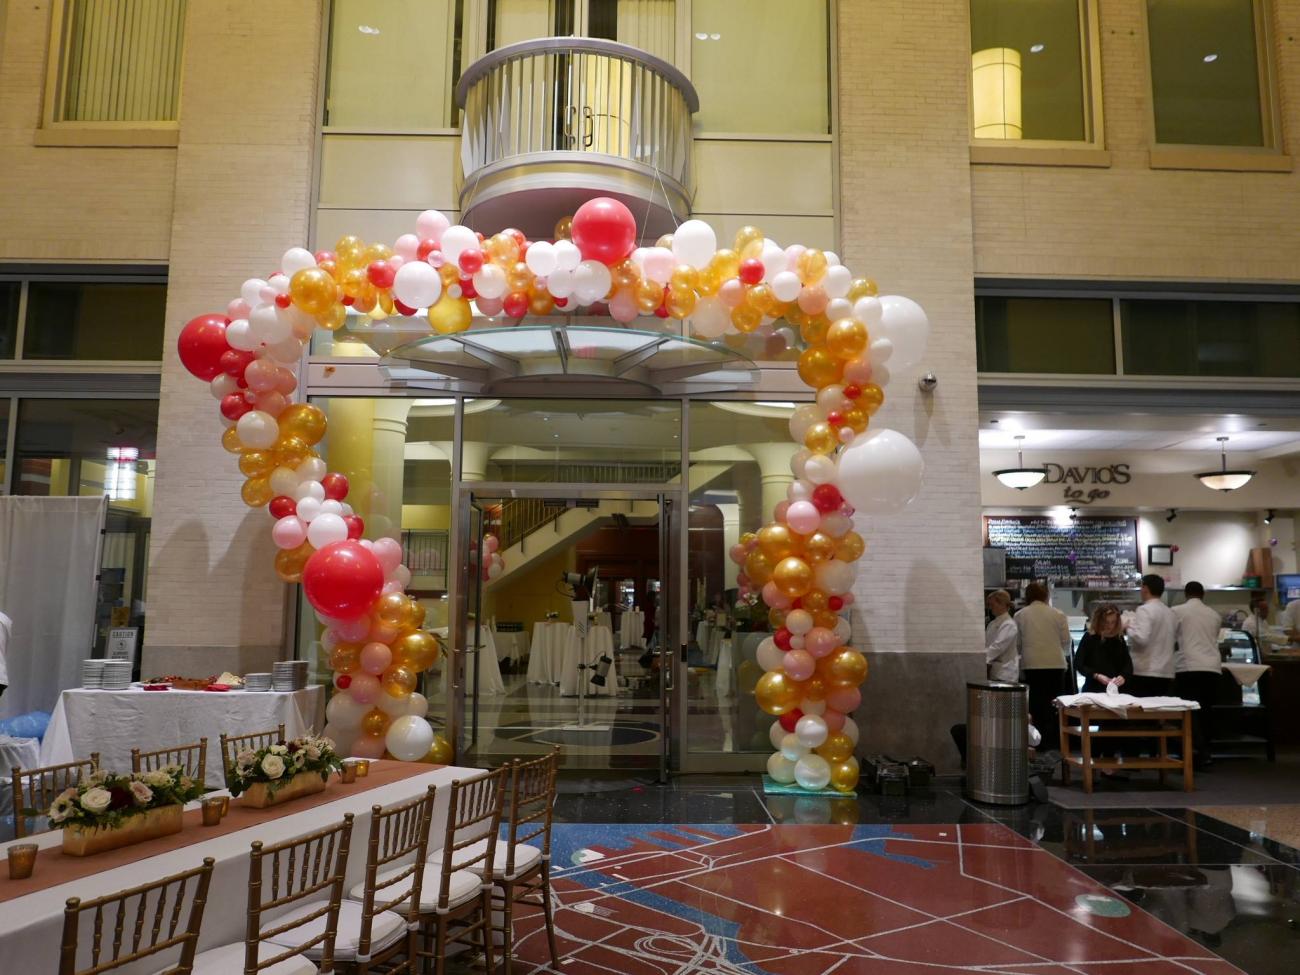 A colorful arch of red, pink, yellow, and white balloons surrounds the entrance to the Galleria lobby space